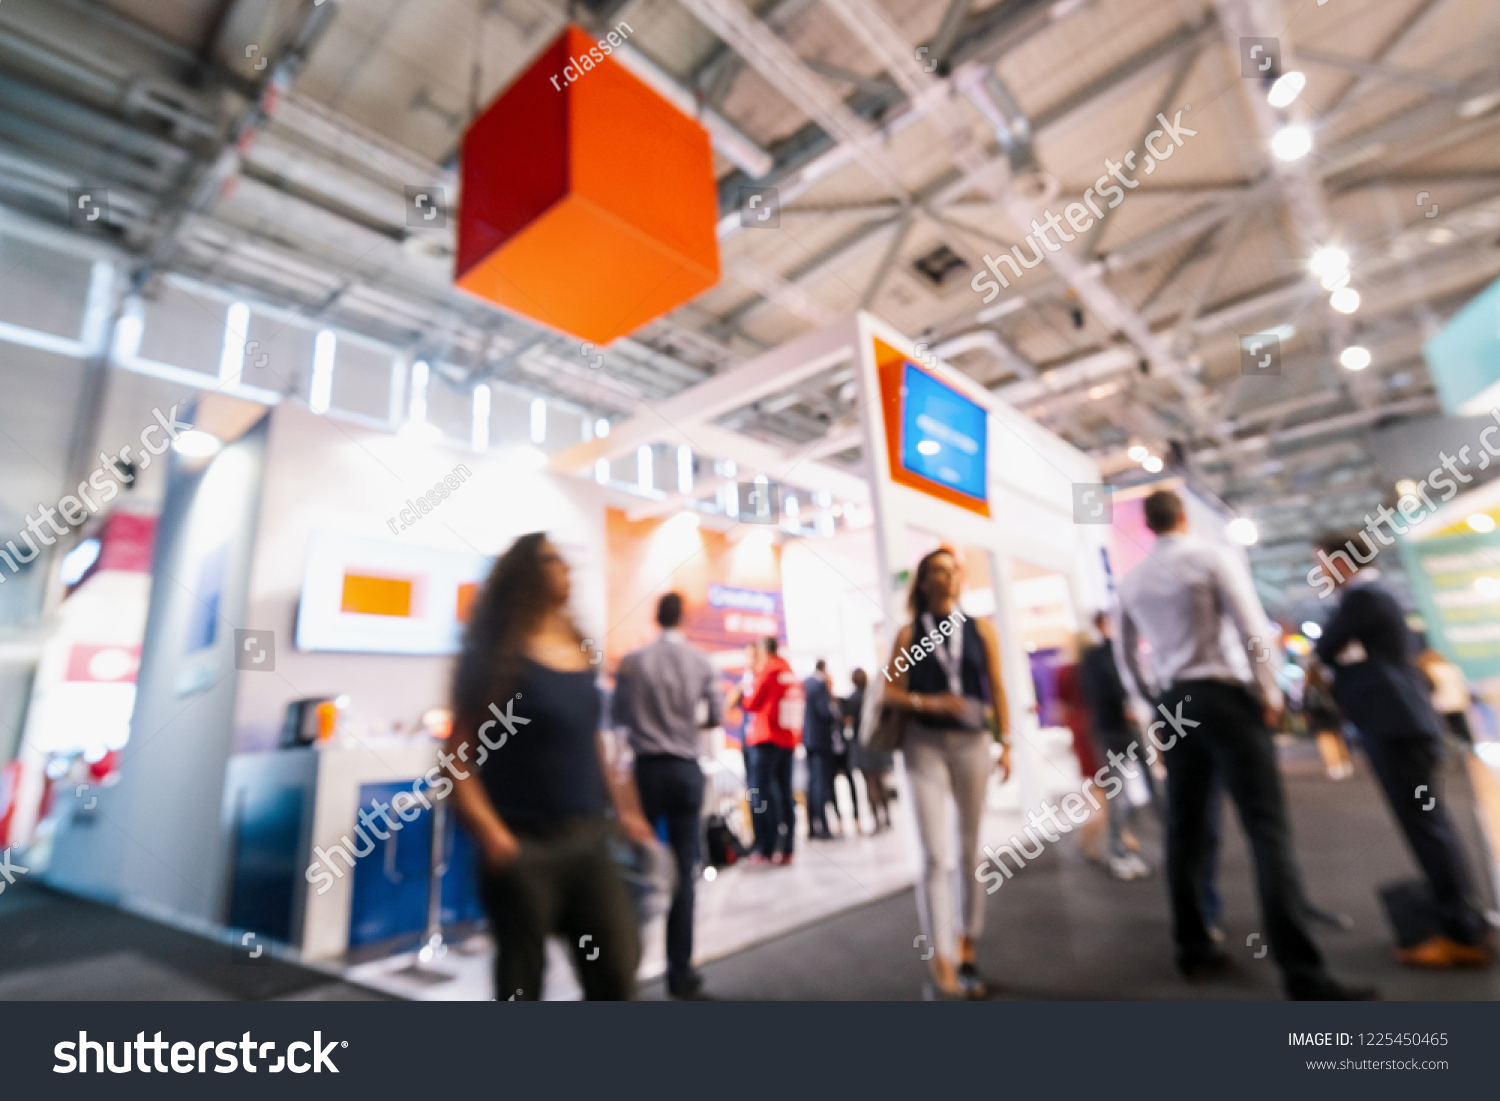 Intentionally blurred trade fair background  #1225450465